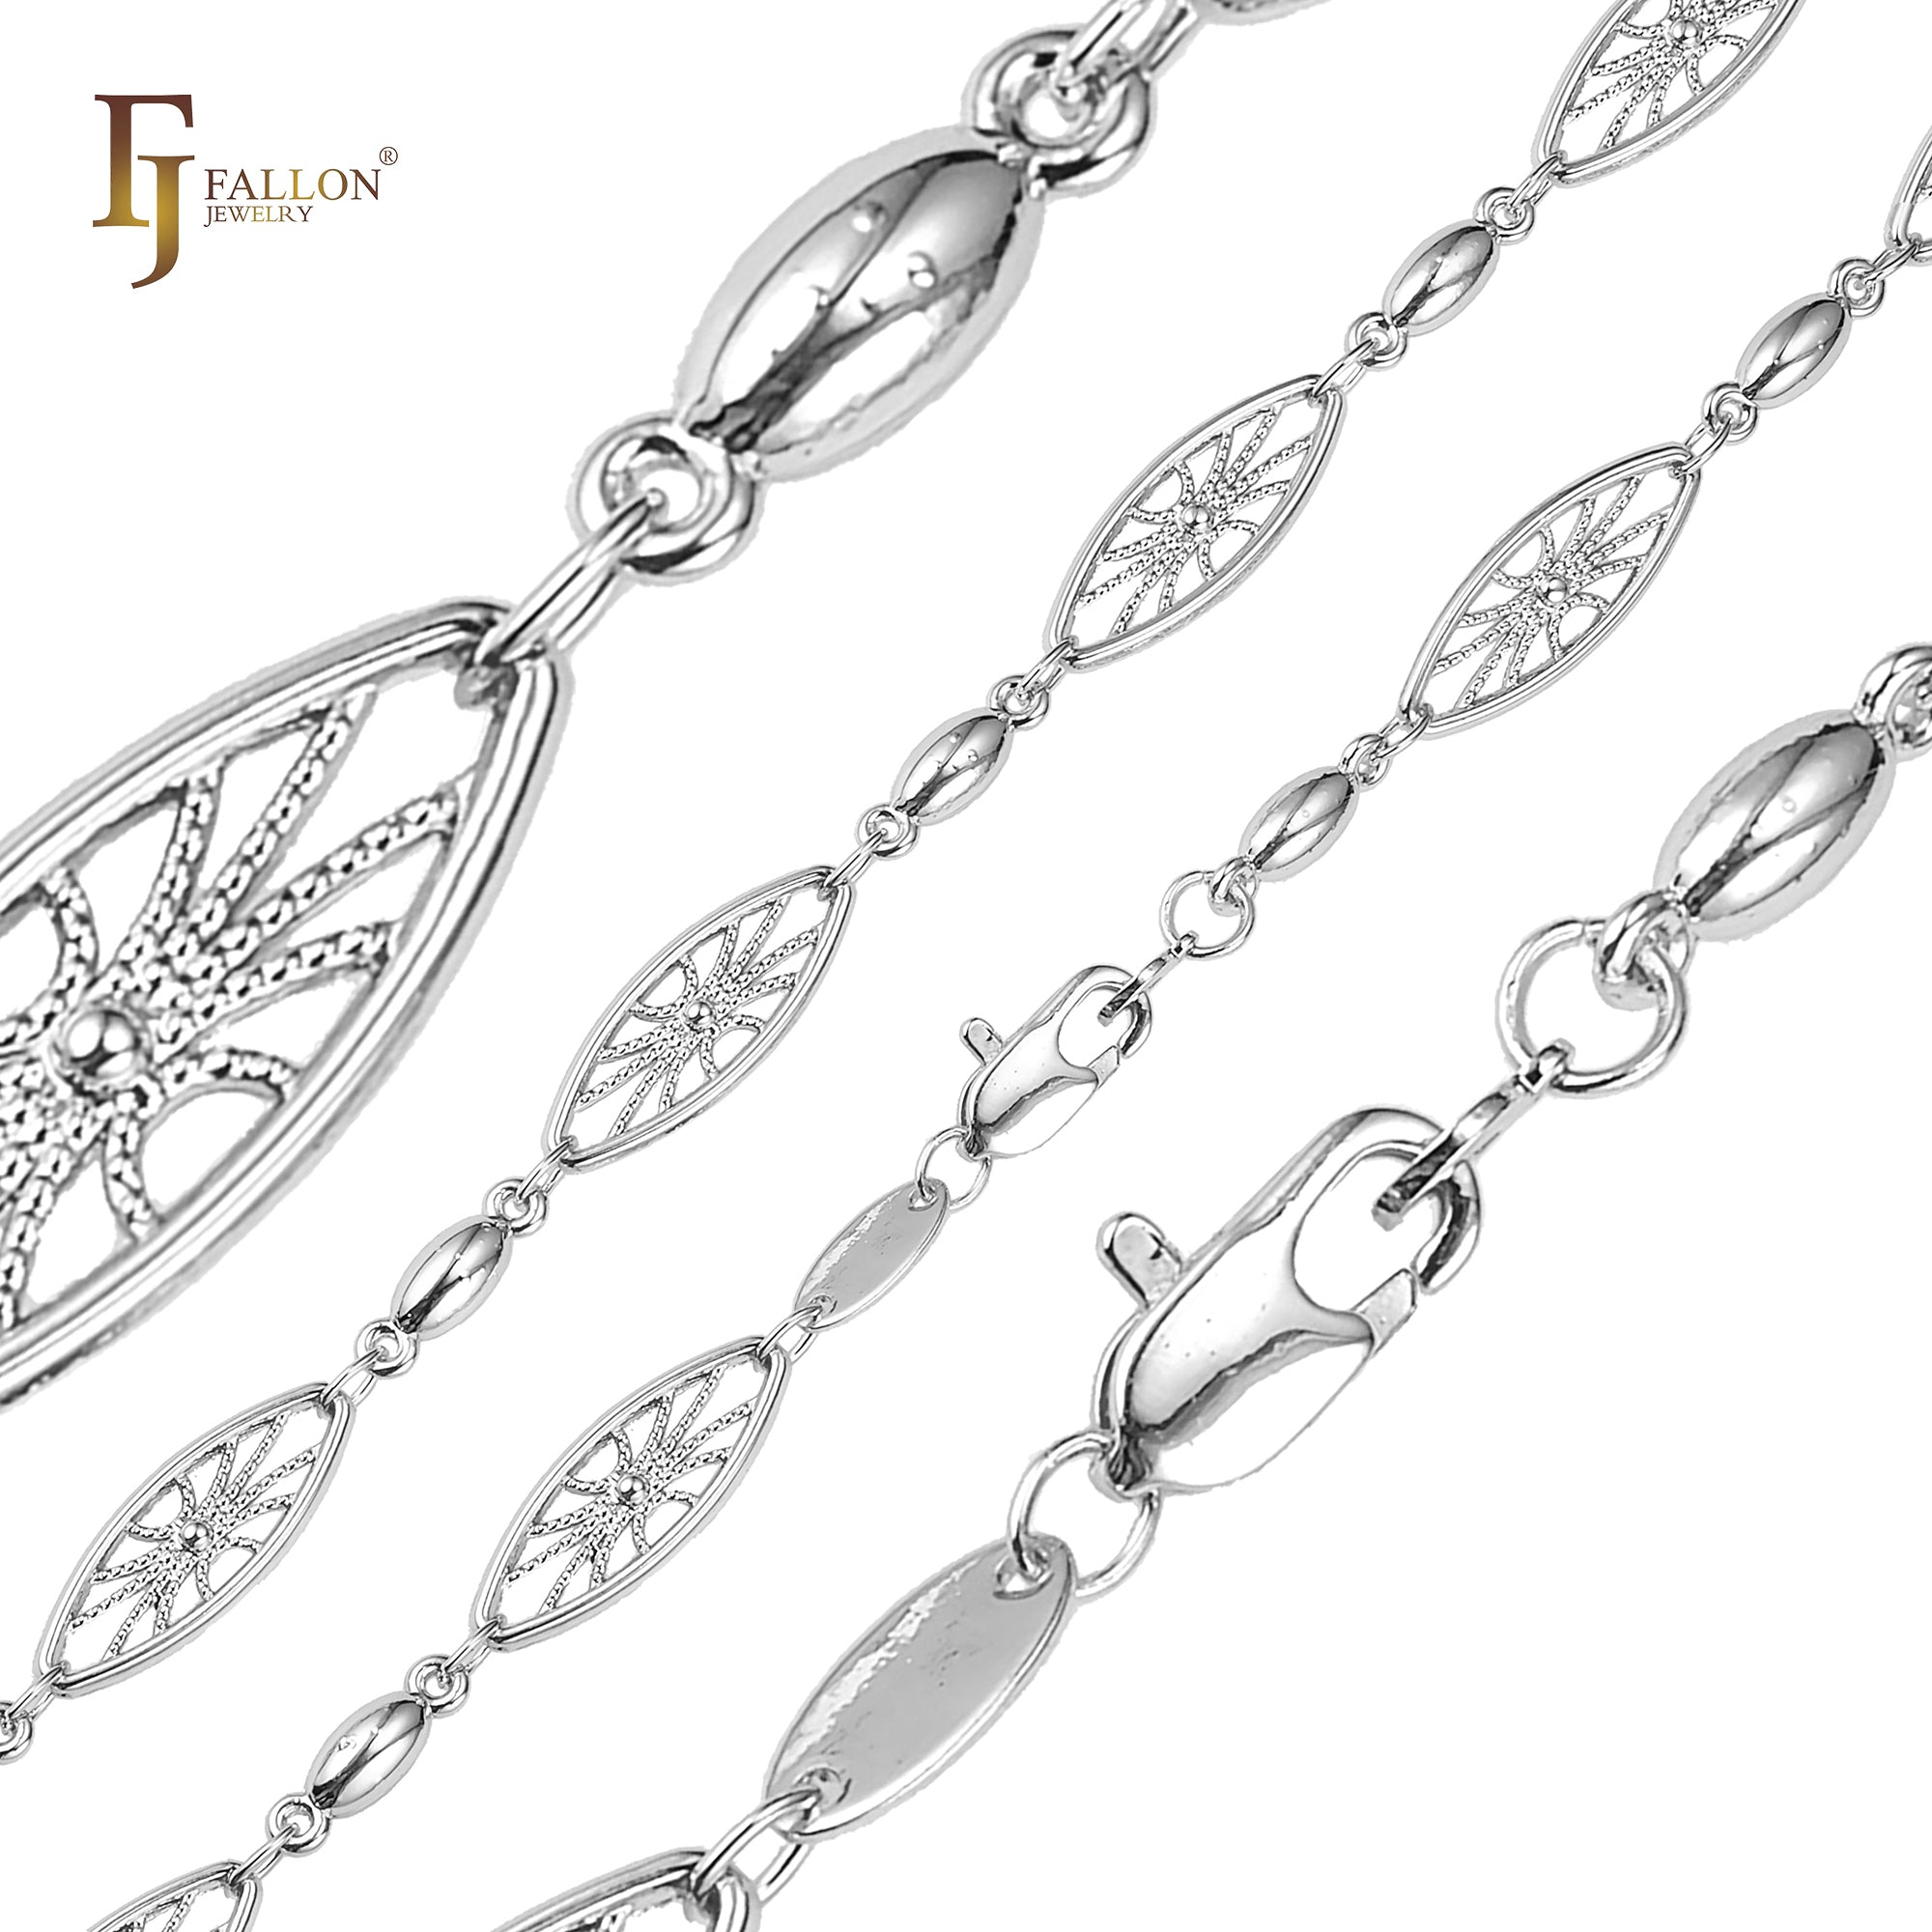 Beads fancy net filigree link chains plated in White Gold, 14K Gold, Rose Gold, two tone